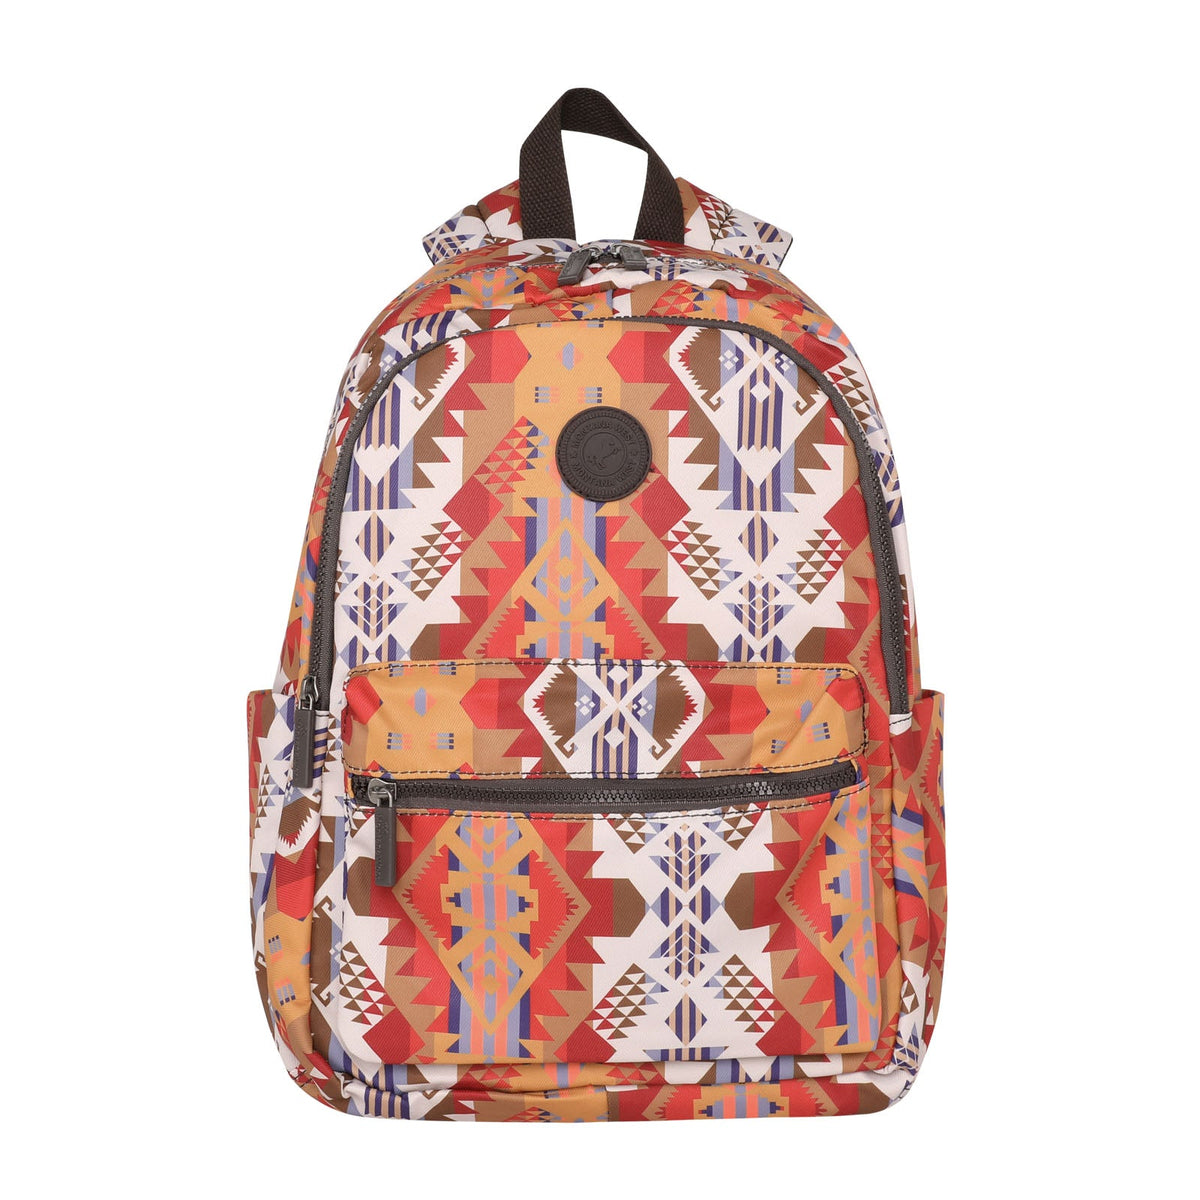 Montana West Multi Color Aztec Print Backpack - Cowgirl Wear